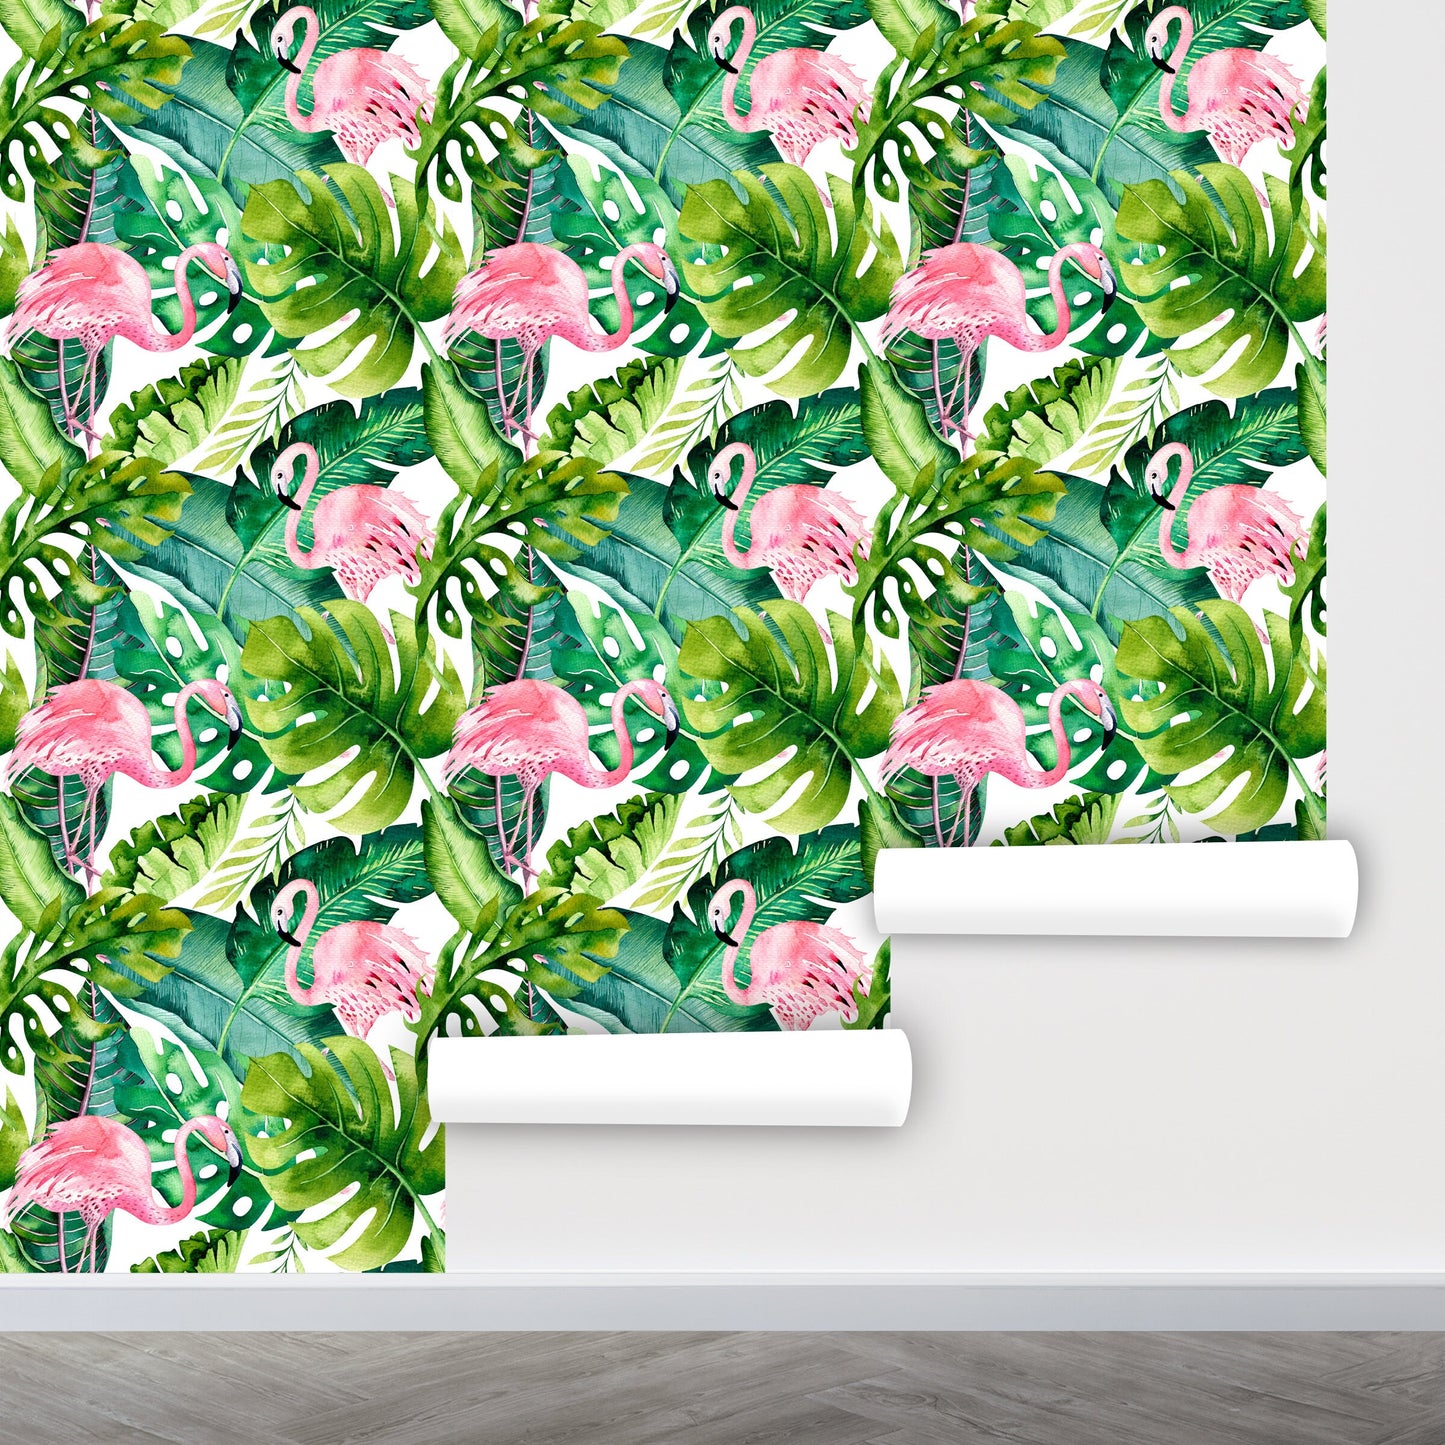 Flamingo Wallpaper Peel and Stick, Palm Wallpaper, Tropical Wallpaper, Removable Wall Paper